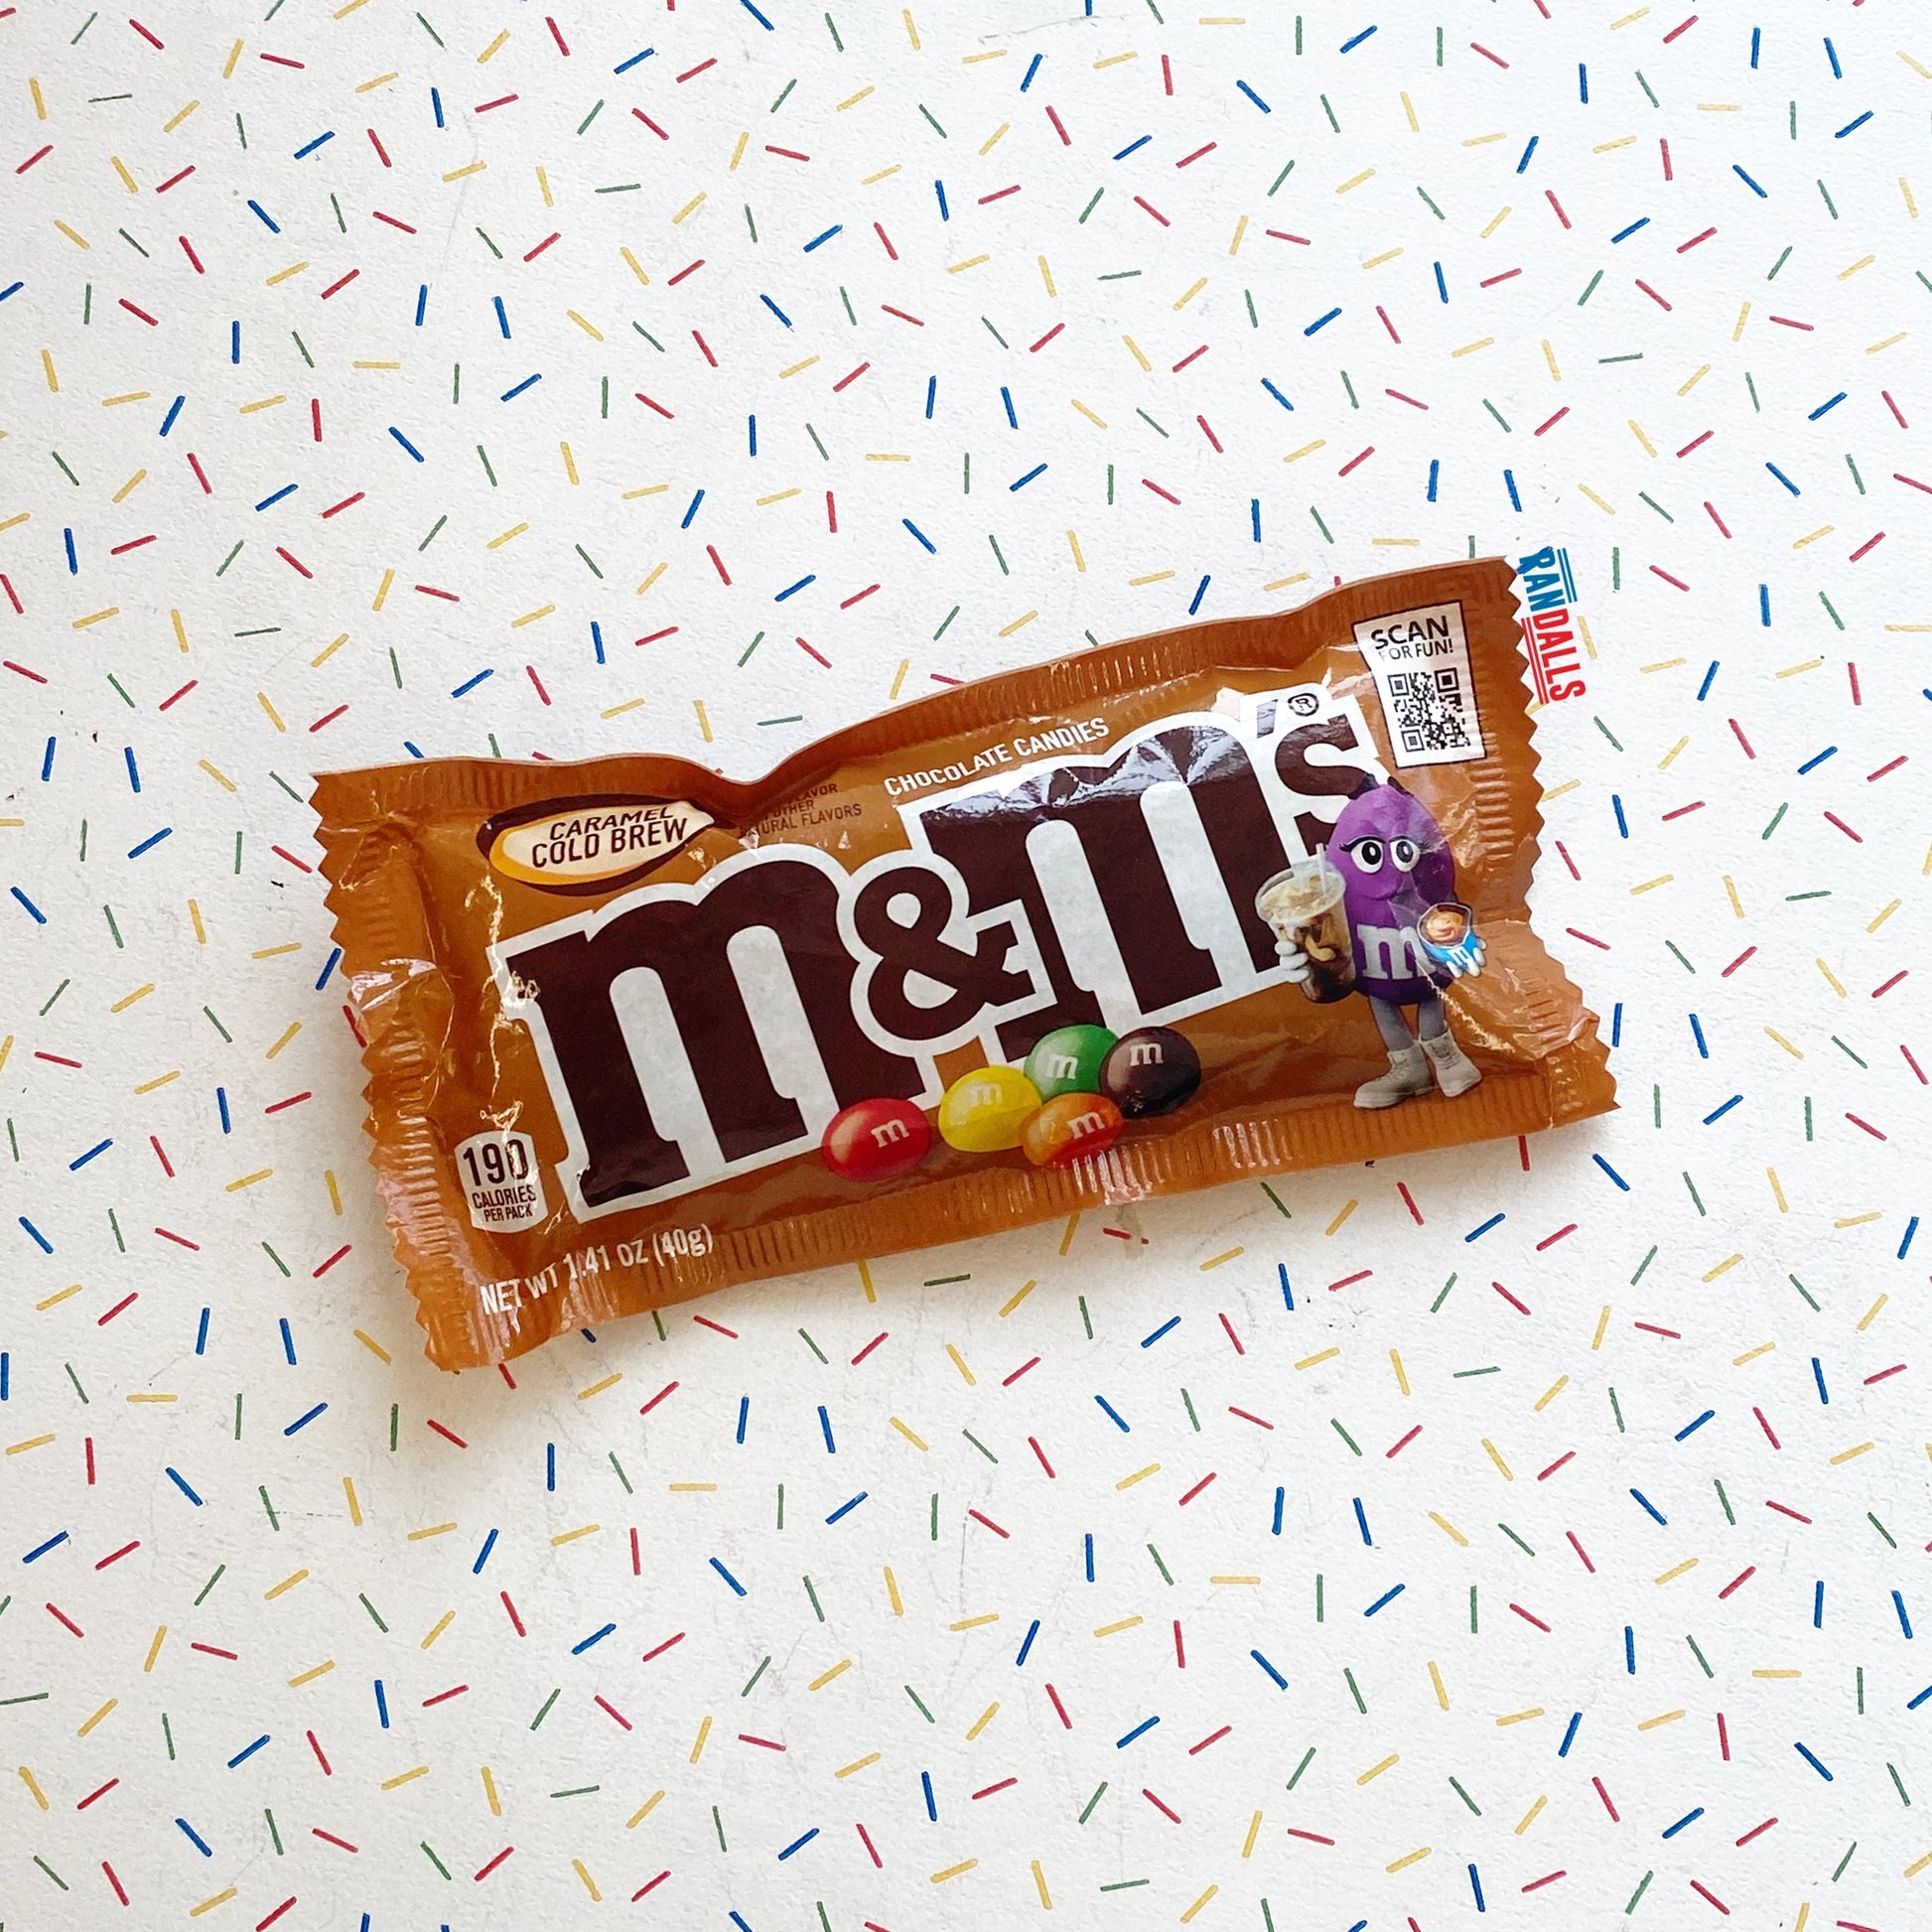 M&m's caramel cold brew, chocolate, coffee, m and ms, usa, randalls